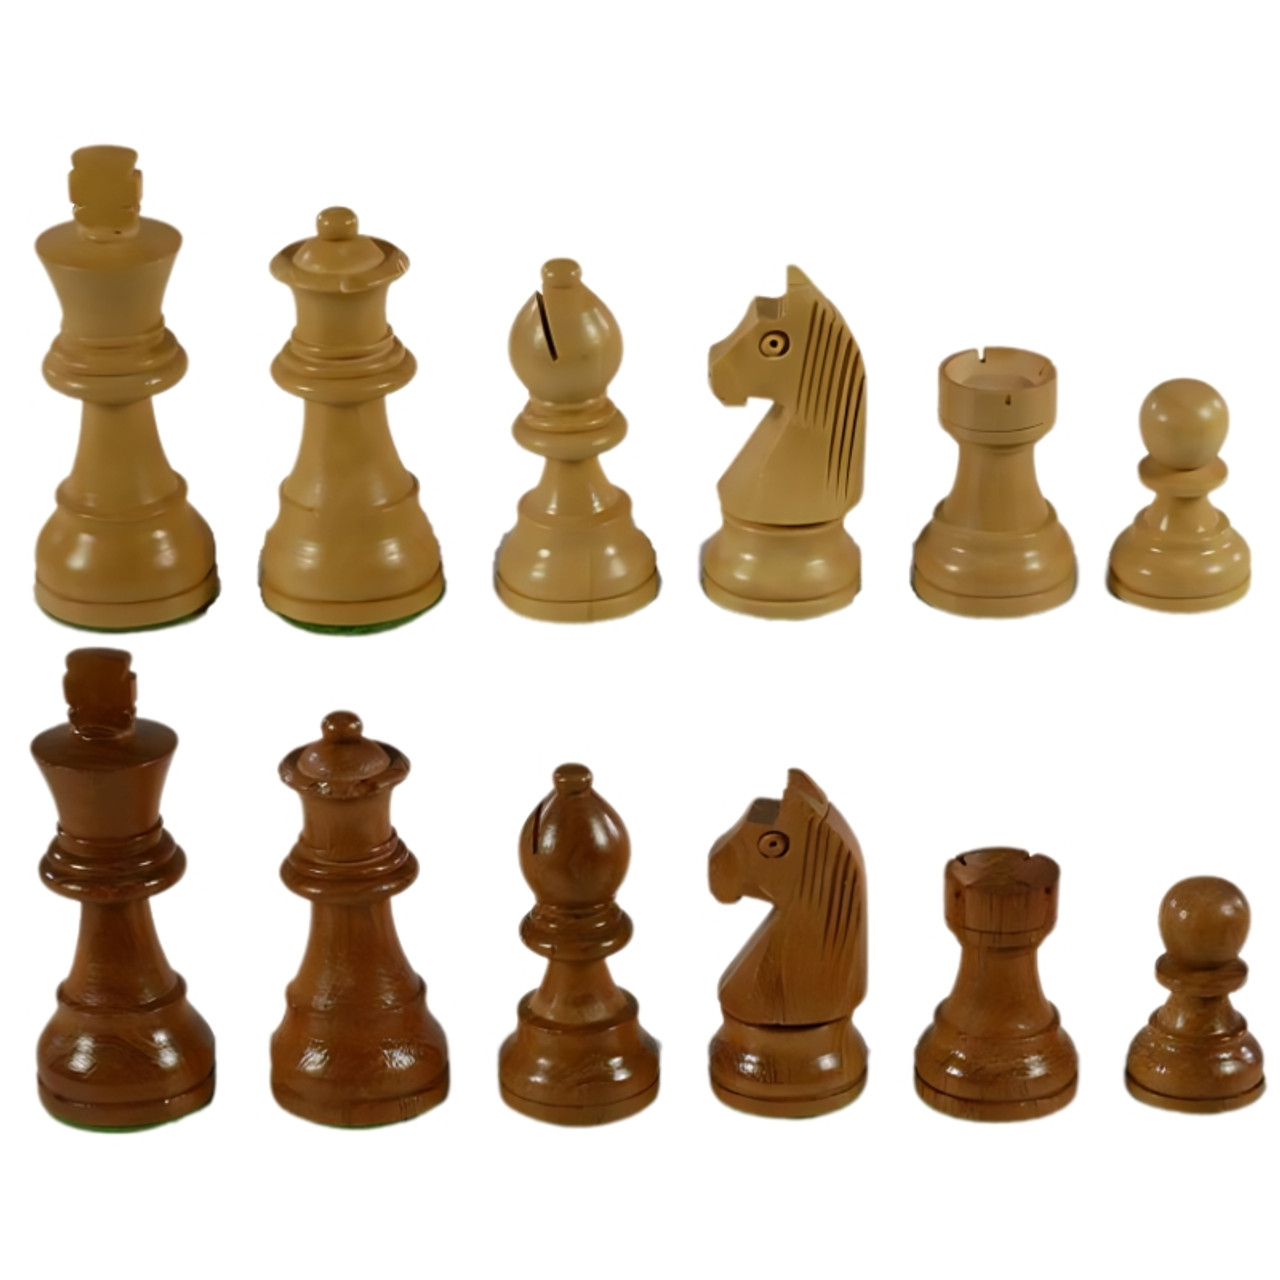 The Bijou Chess Pieces - Kirkwood & Natural Boxwood German Chessmen with 3" King